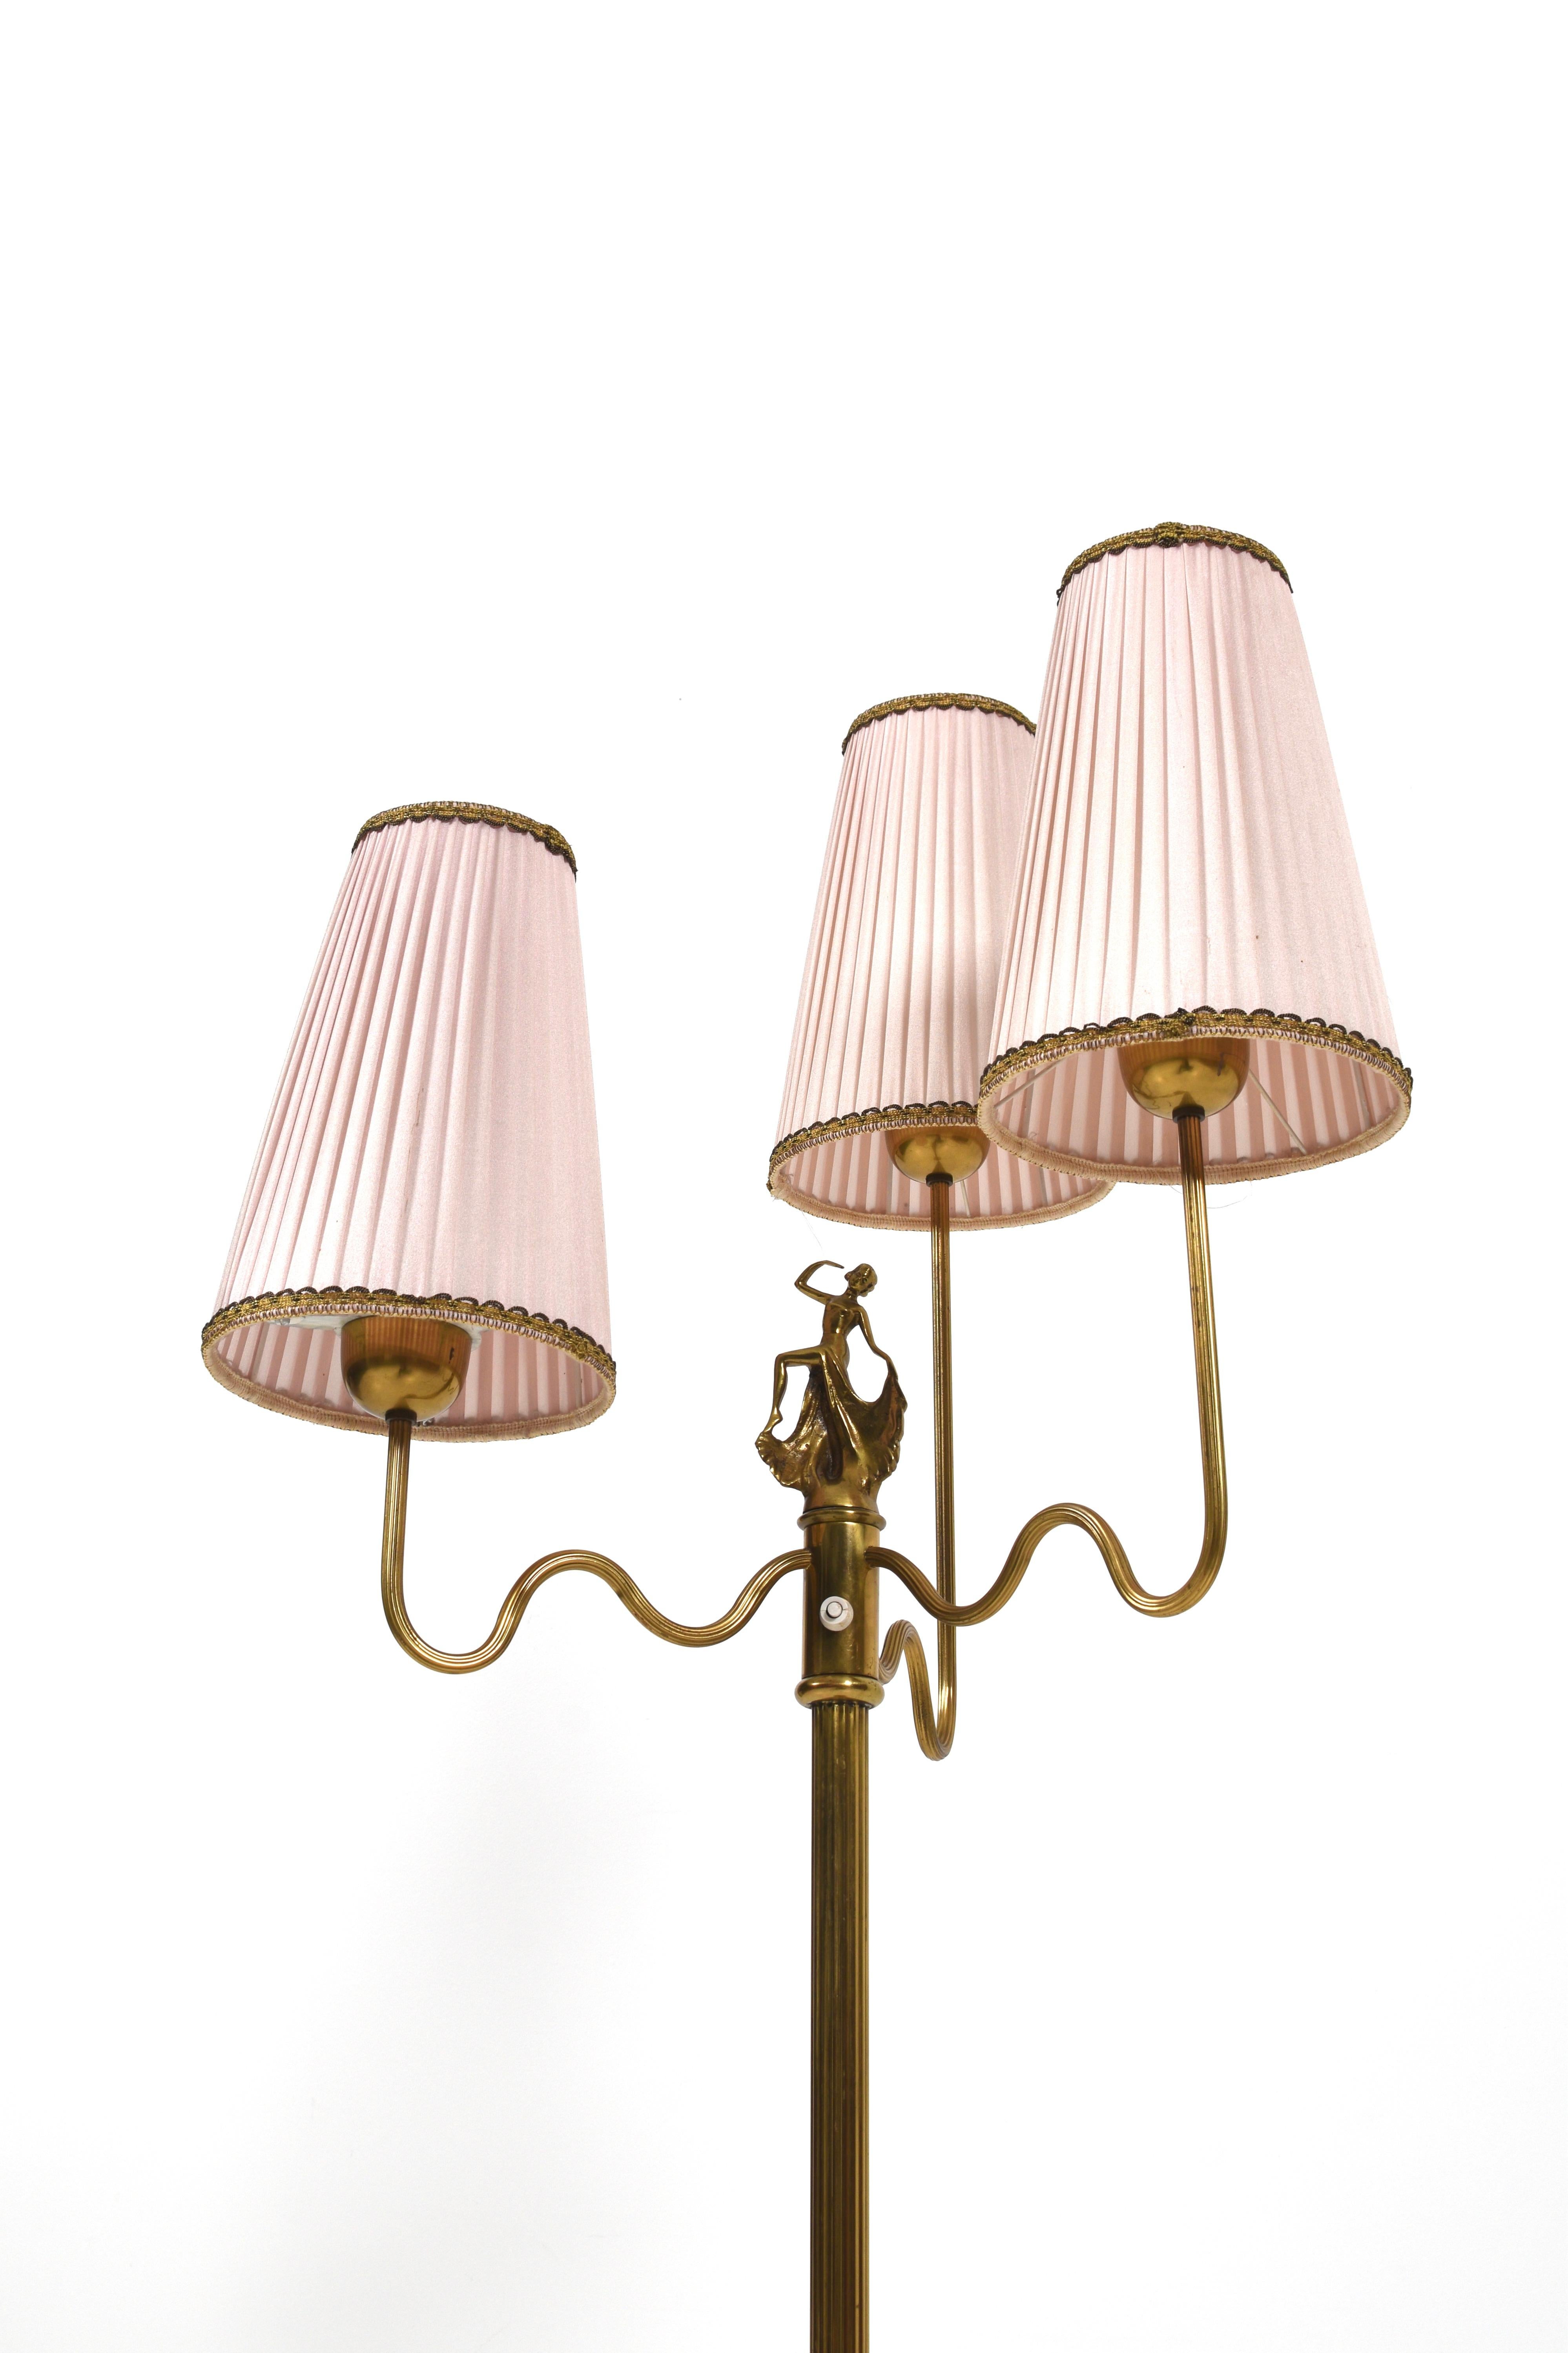 This elegantly designed floor lamp from the 1930s is a true work of art of its time. Crafted from polished brass, it adds a timeless elegance to whatever room it is placed in. 

With three curved arms, the lamp reaches upwards and holds beautiful